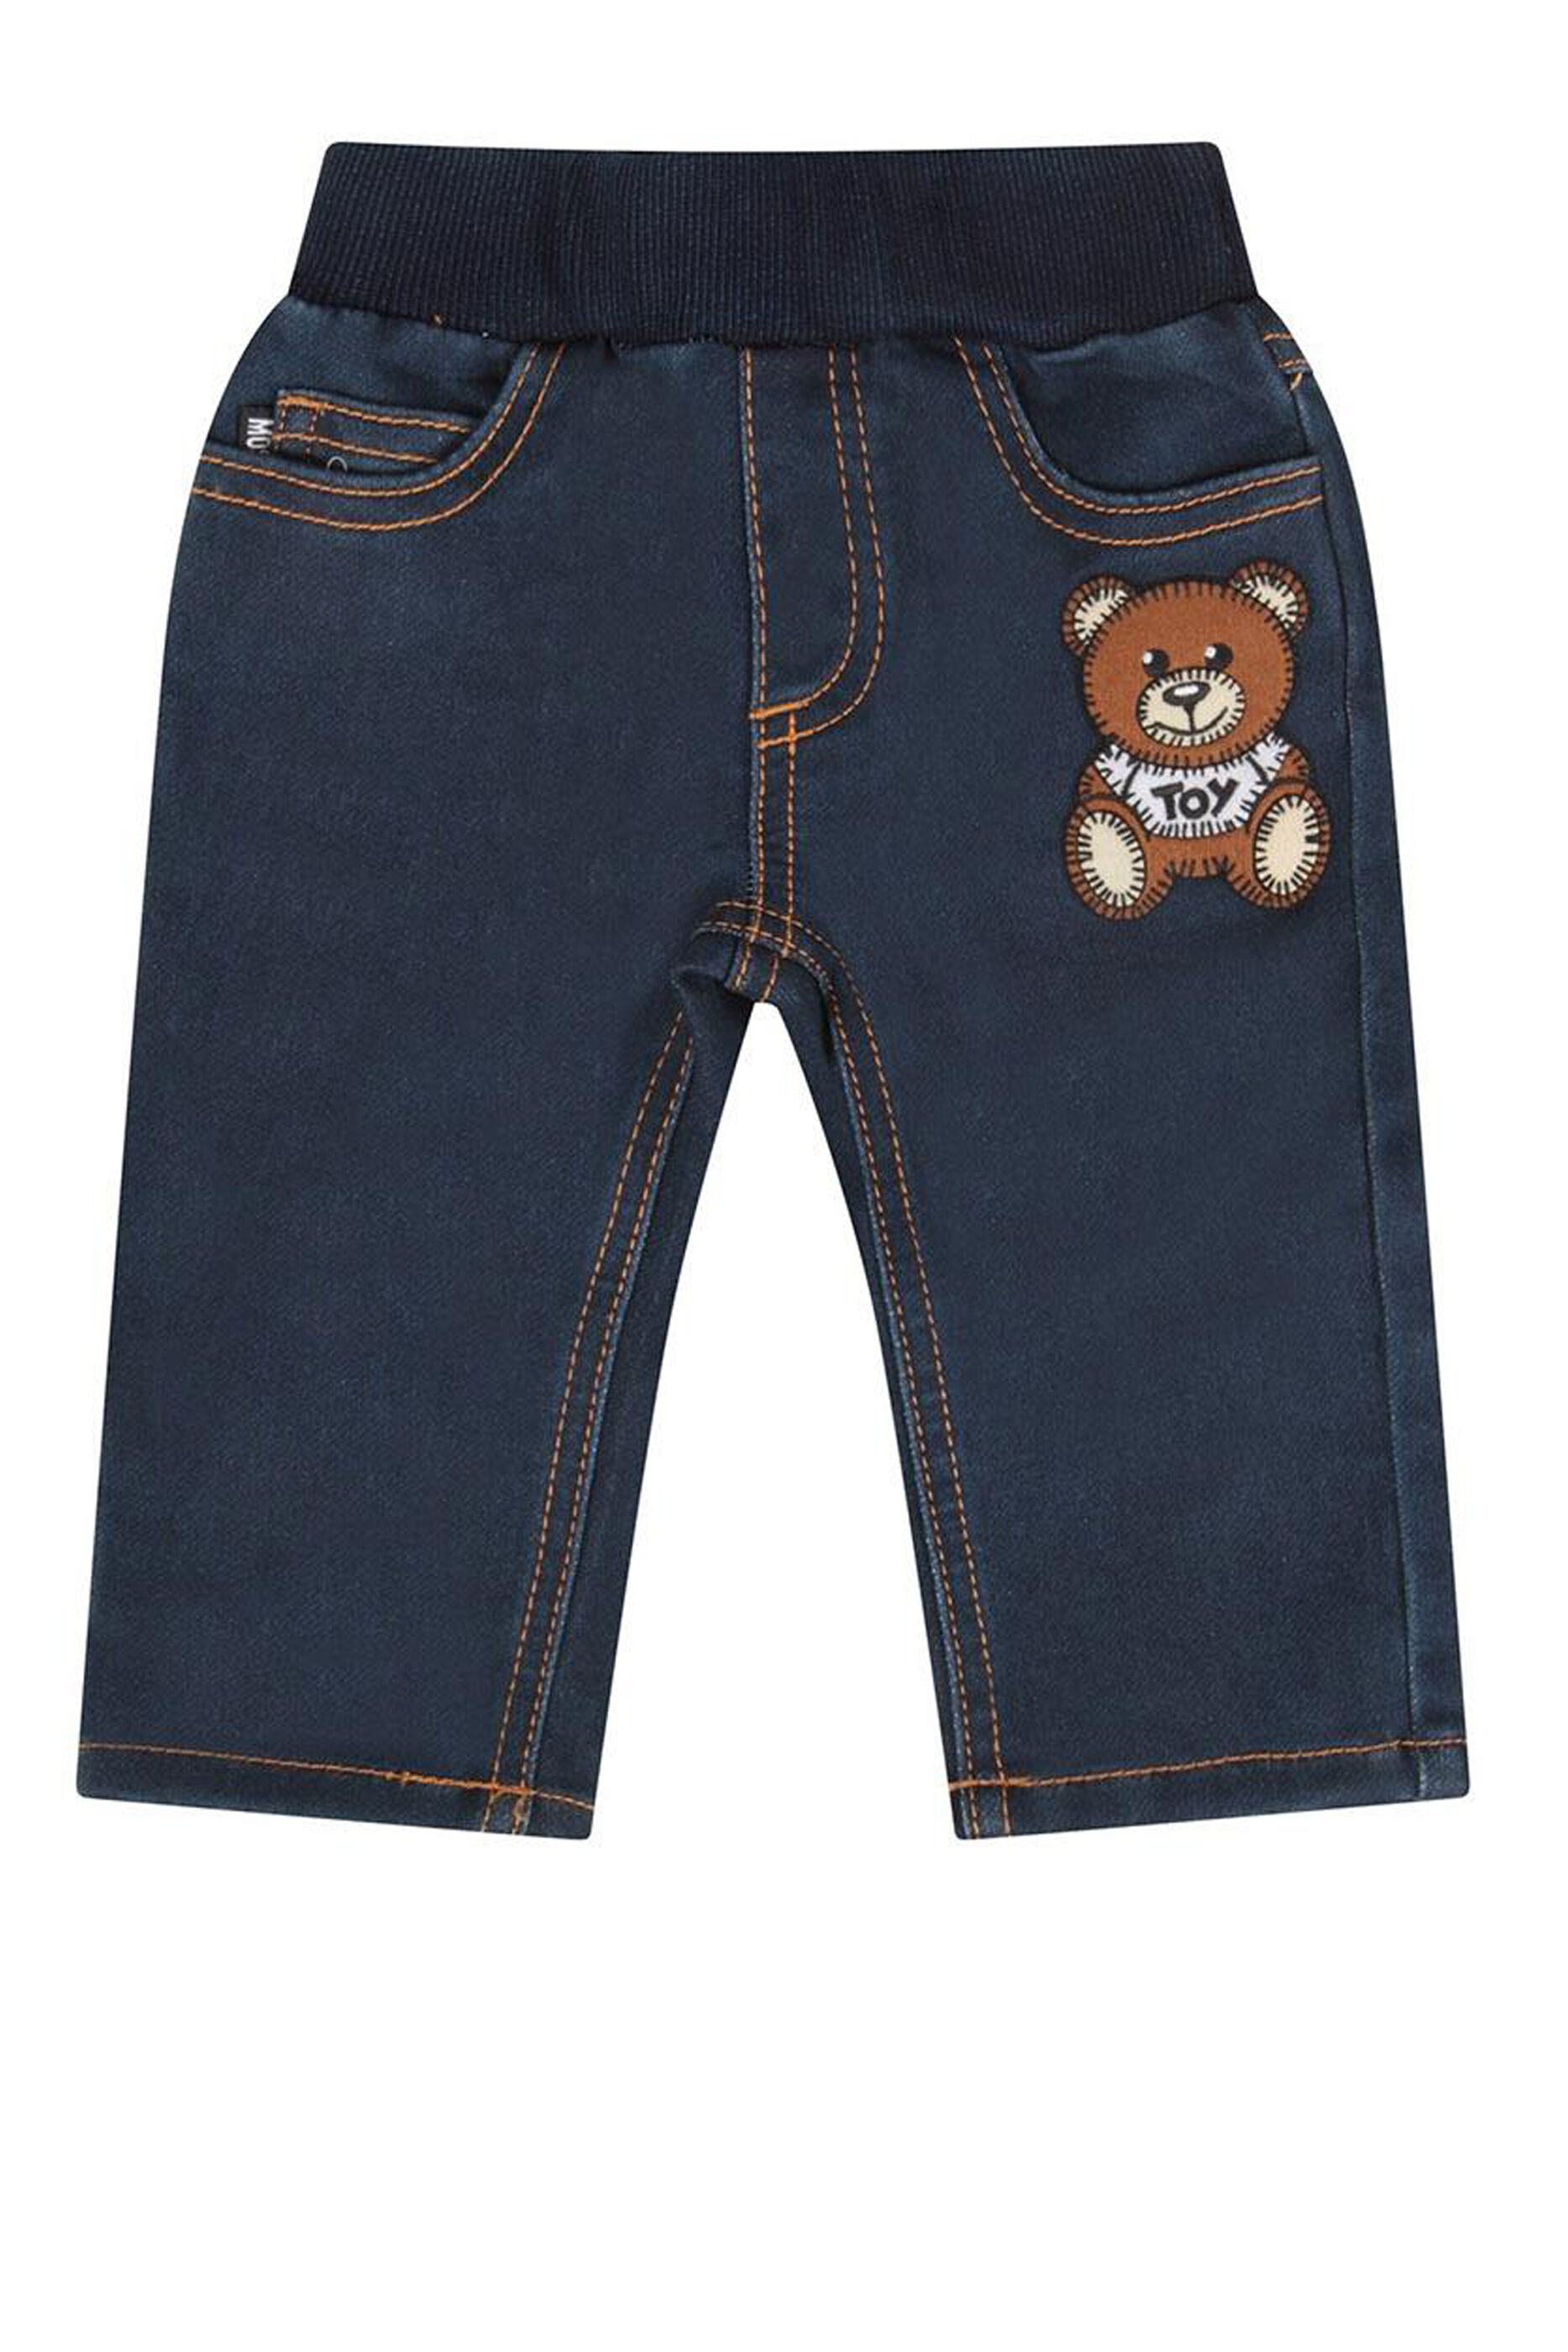 teddy jeans for sale